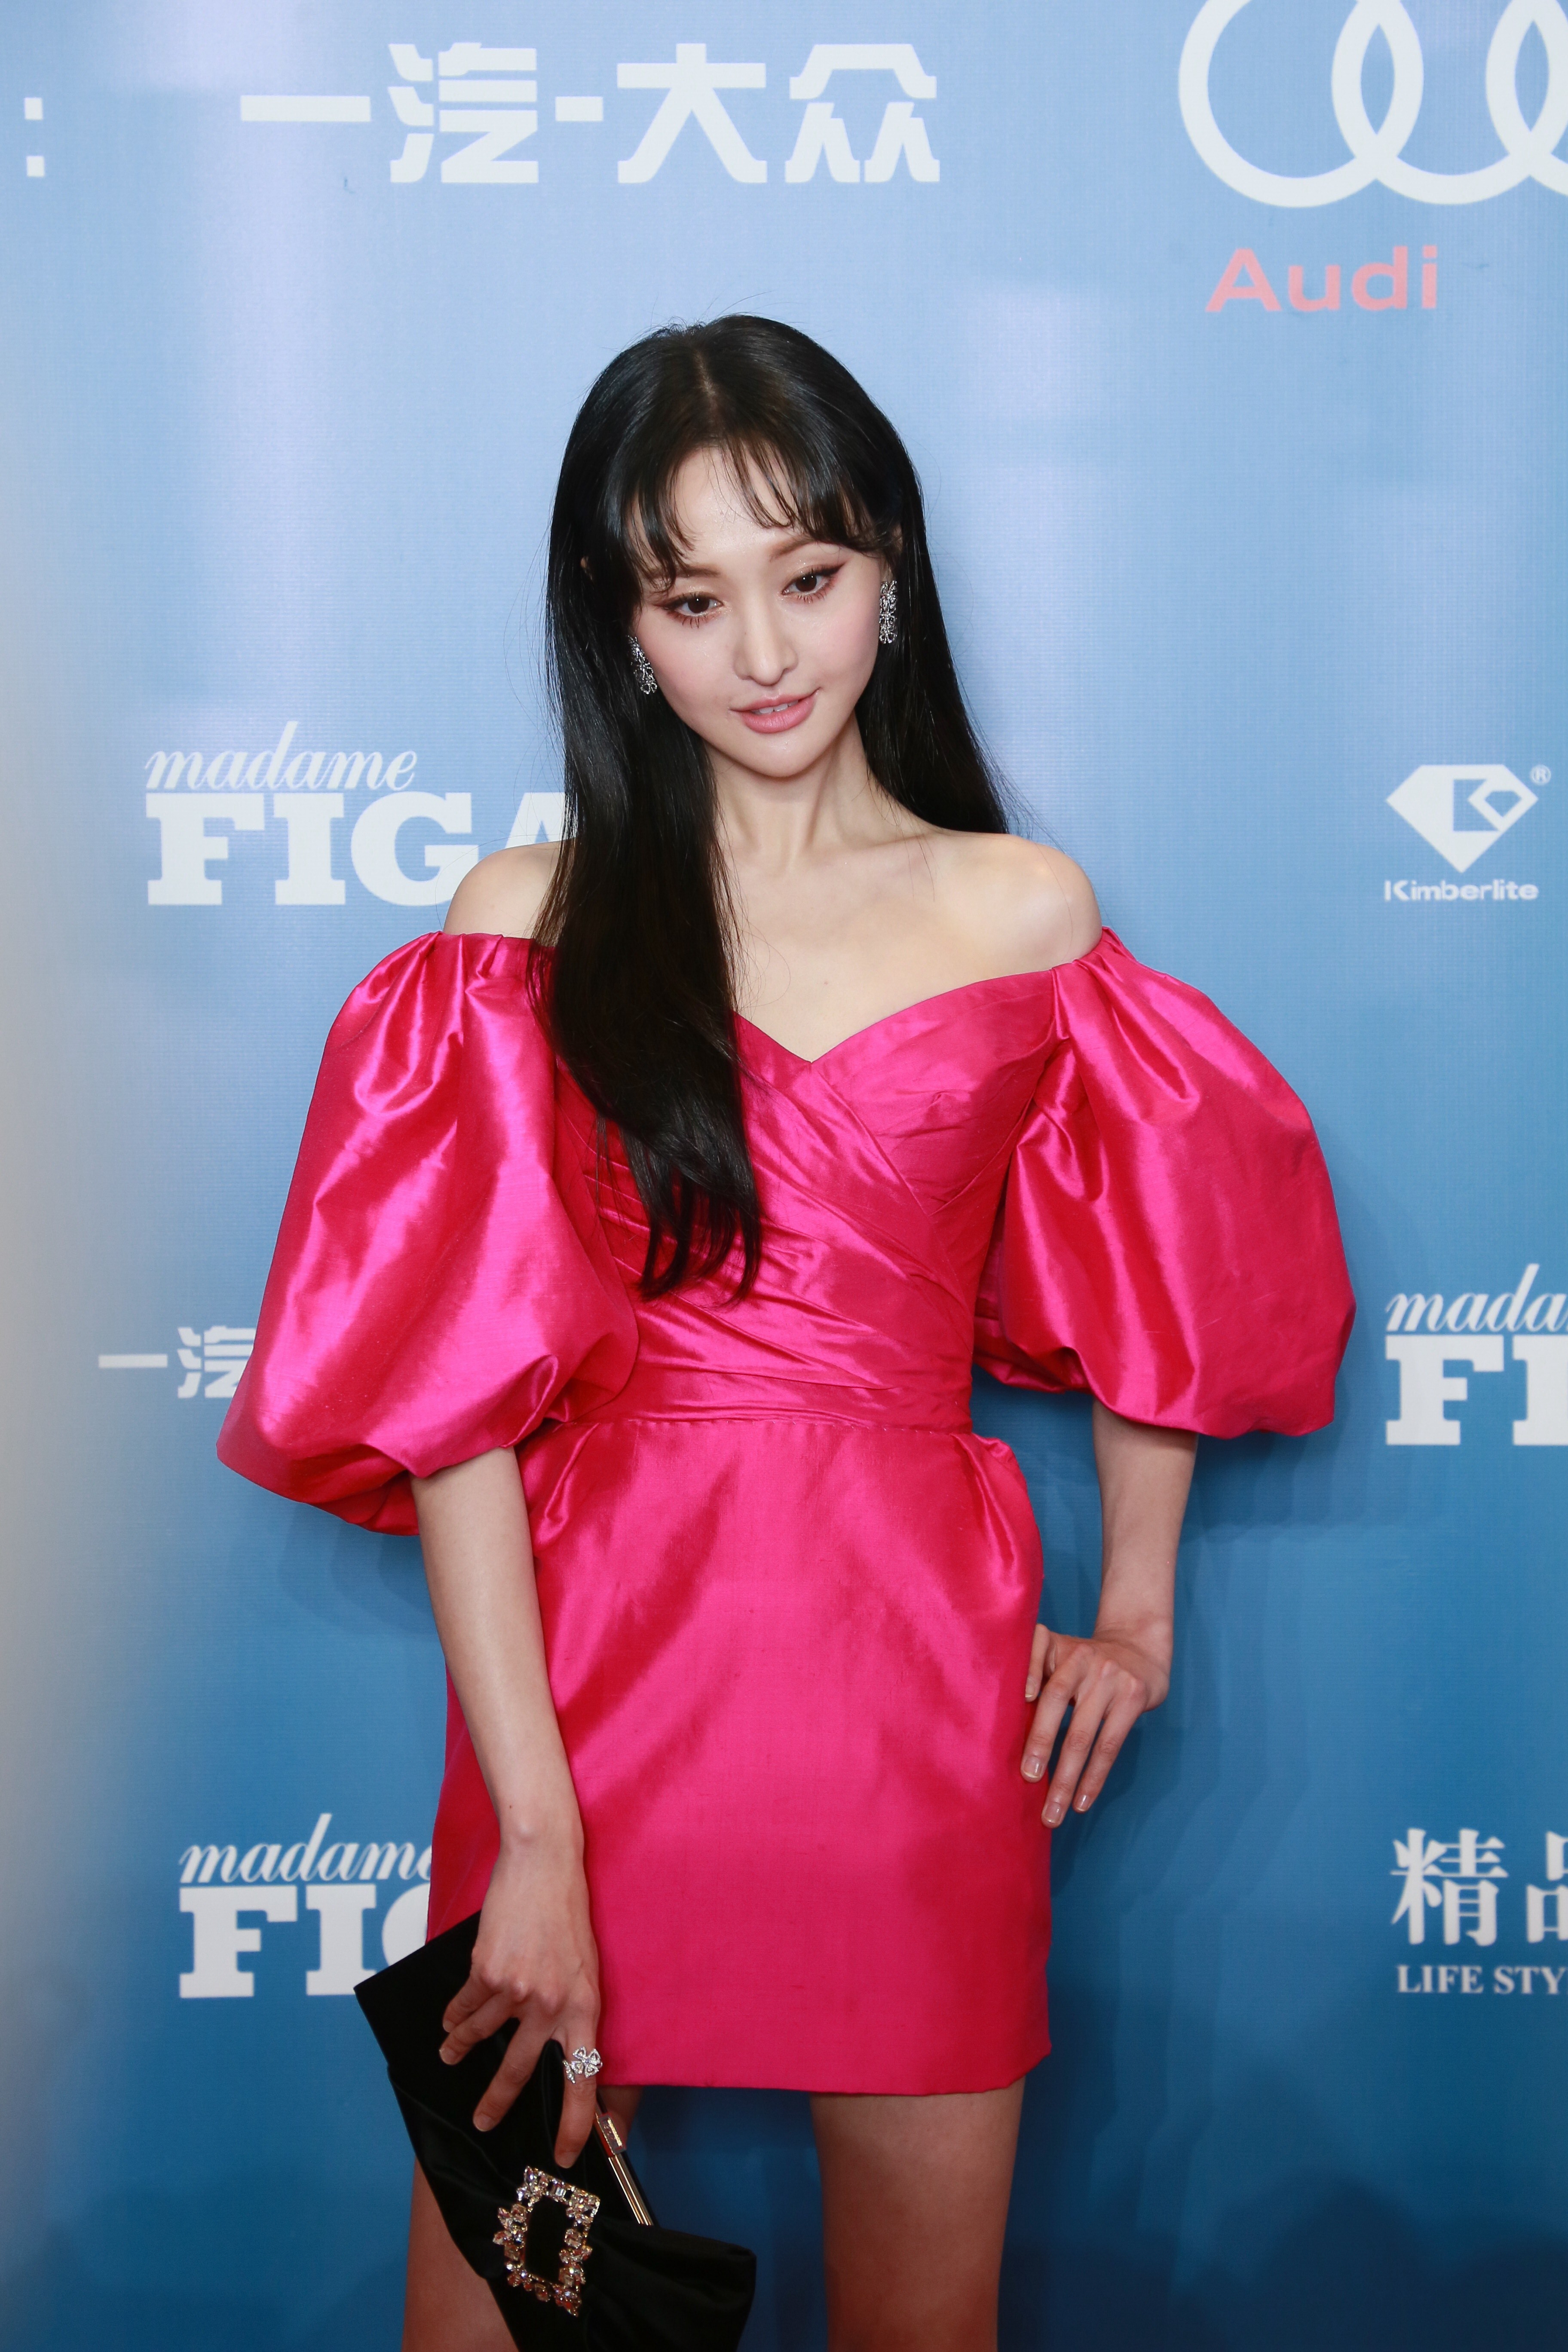 Zheng Shuang attends a fashion event in Beijing in December 2019. Photo: Getty Images